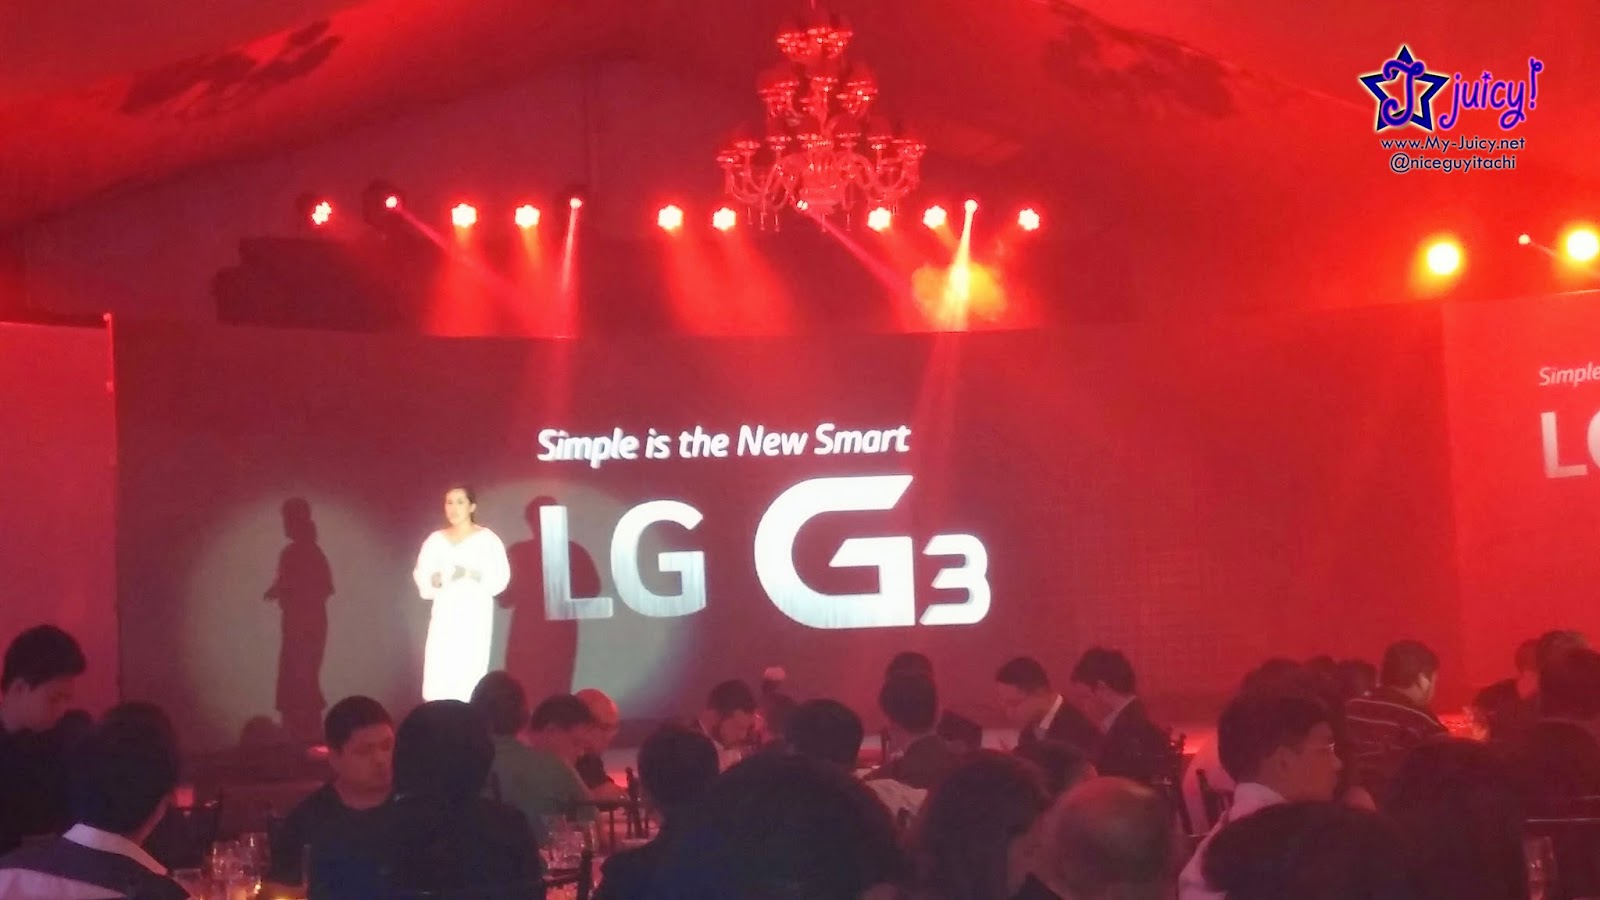 LG G3 comes in PH - "Simple is the new smart"